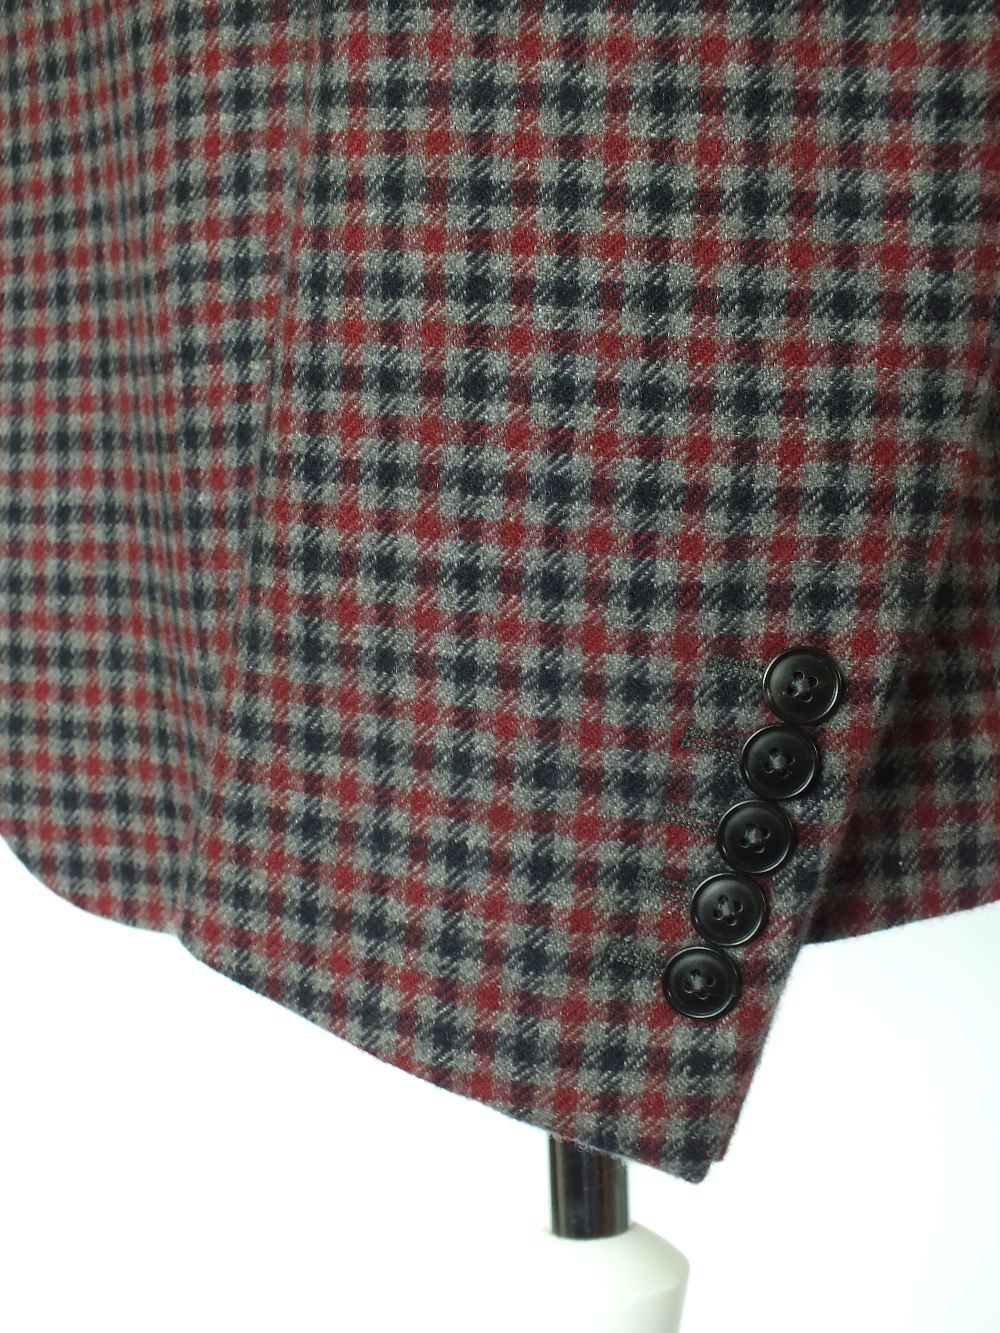 A Gucci jacket, red, grey and navy check, double vented, half lined, Italian size 52R, 100% - Image 5 of 6